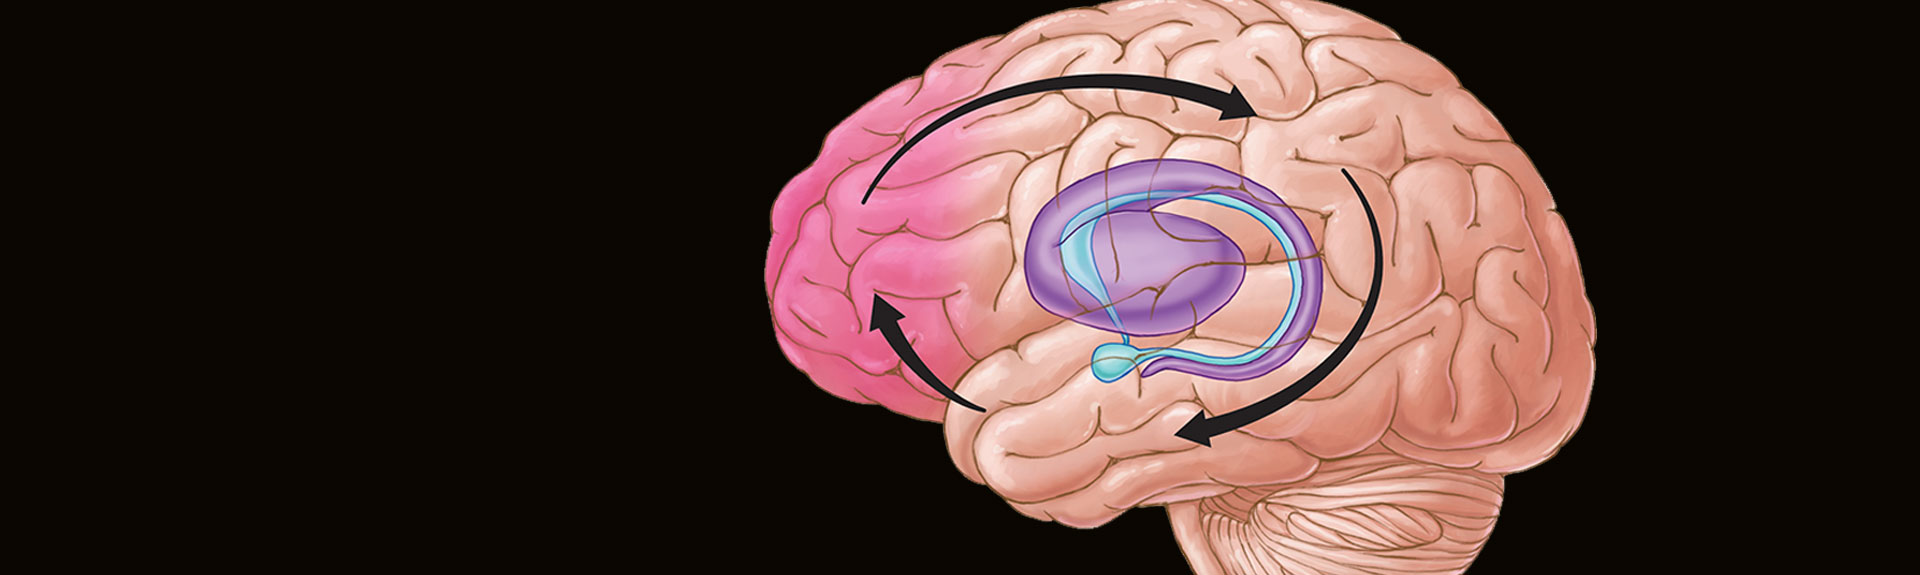 An illustration showing the three stages of the addiction cycle and the brain regions associated with them